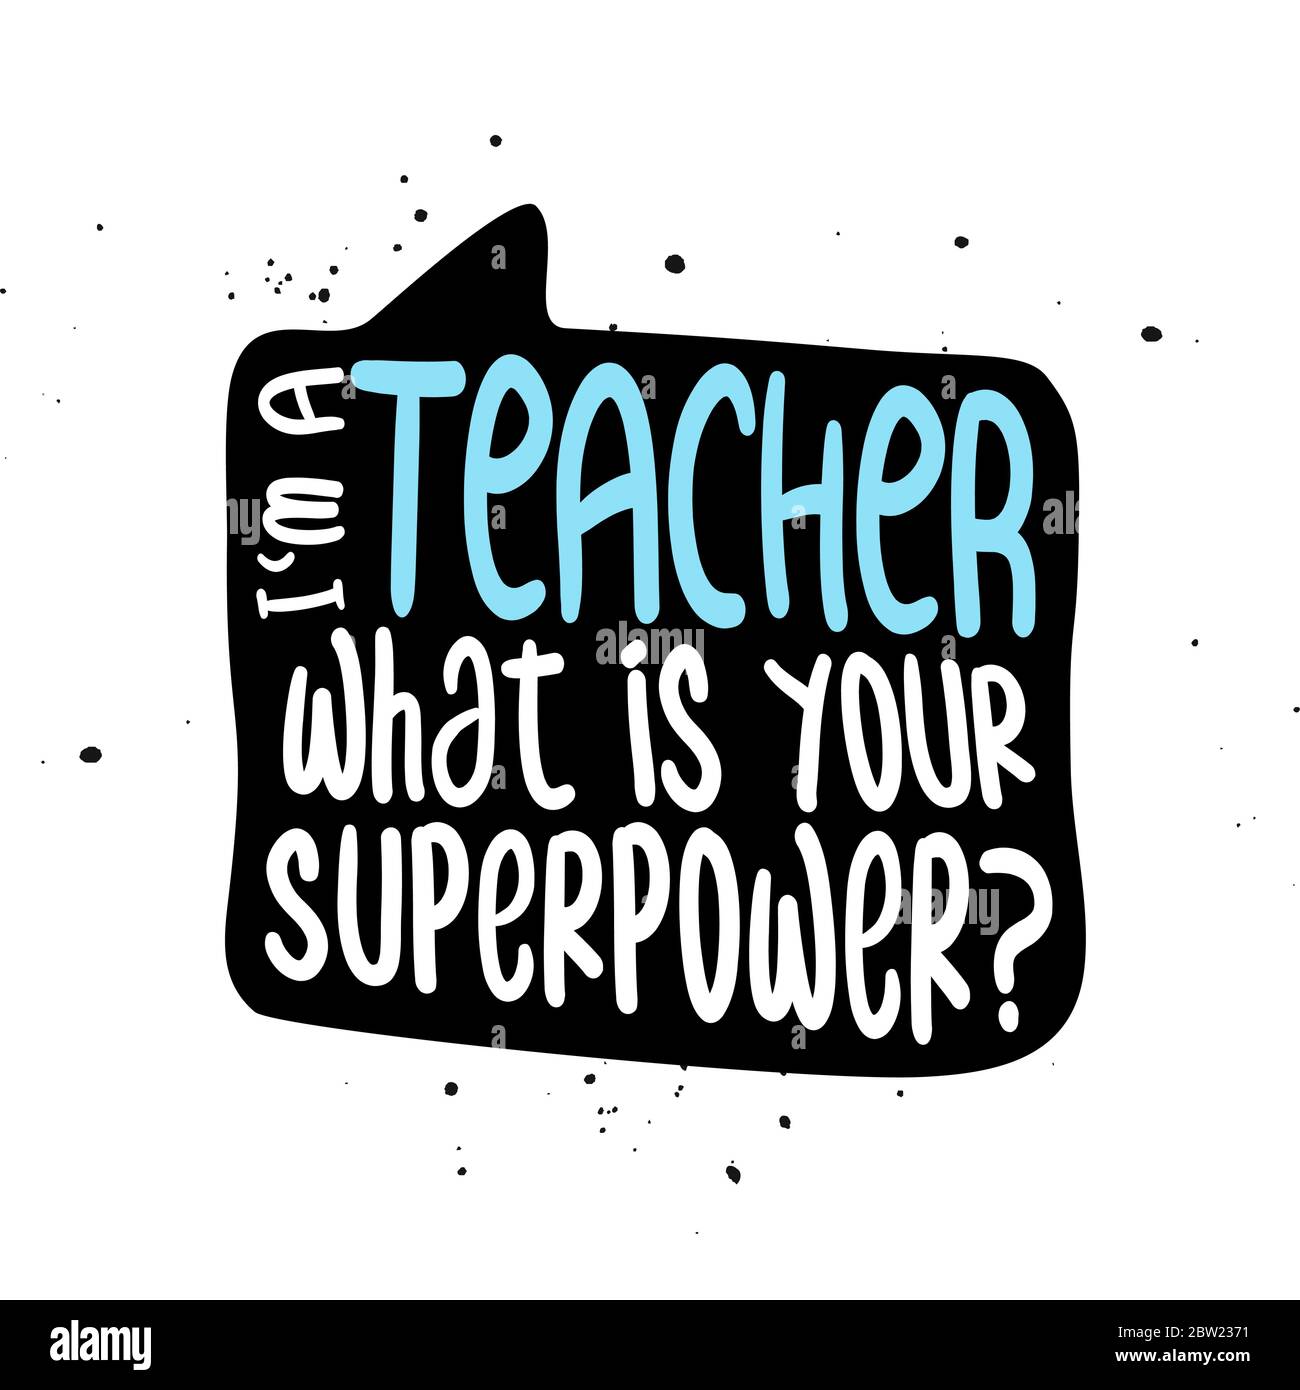 https://c8.alamy.com/comp/2BW2371/i-am-a-teacher-what-is-your-superpower-awareness-lettering-phrase-online-school-learning-poster-with-text-for-self-quarantine-t-shirt-design-tem-2BW2371.jpg